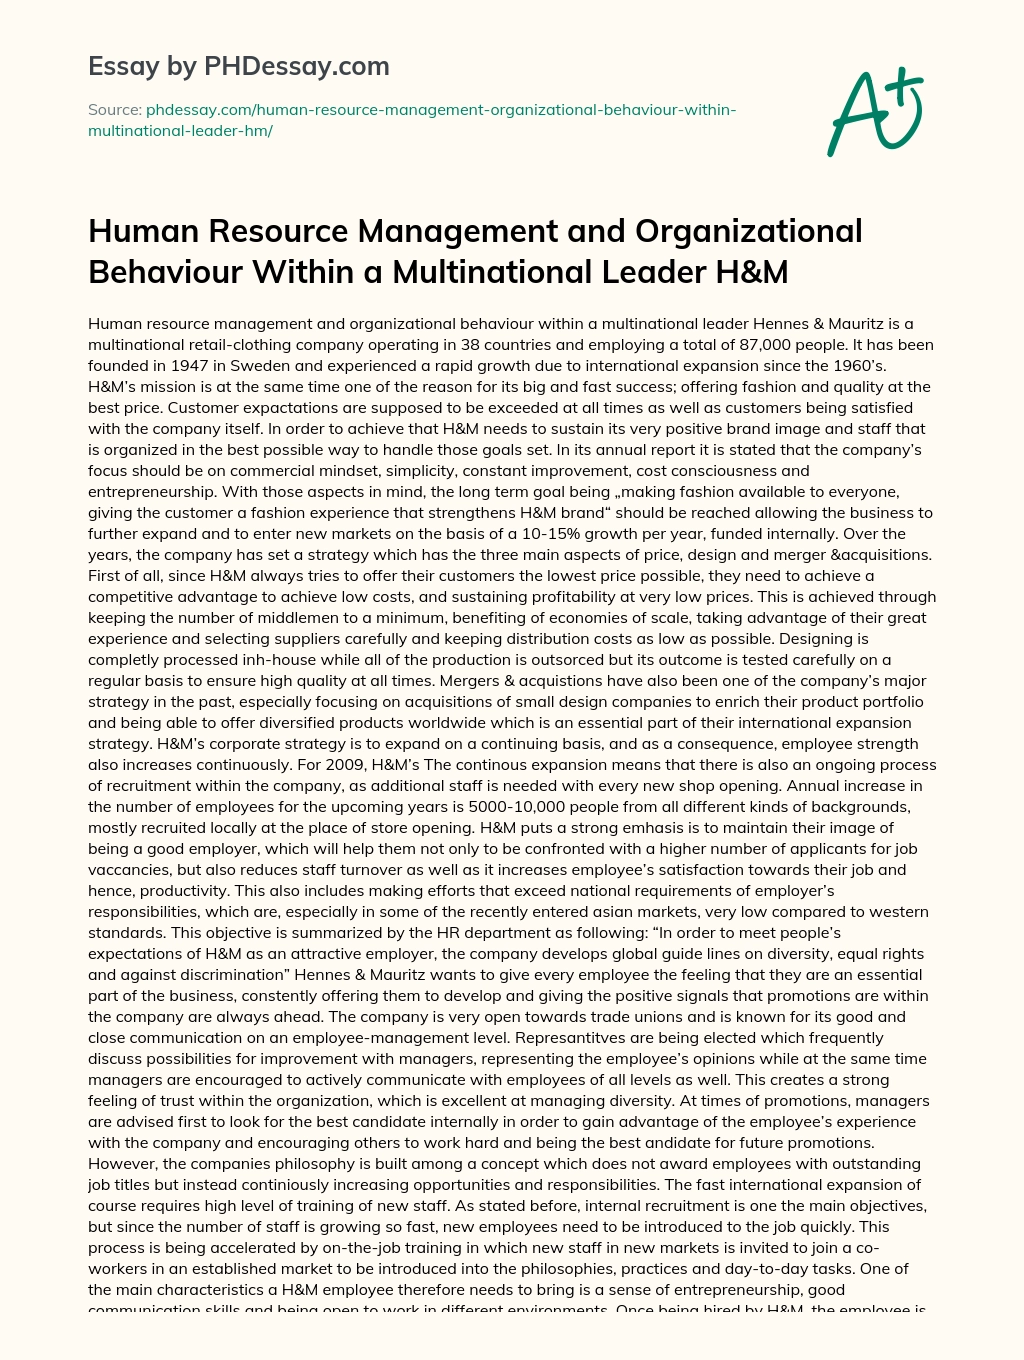 Human Resource Management and Organizational Behaviour Within a Multinational Leader H&M essay